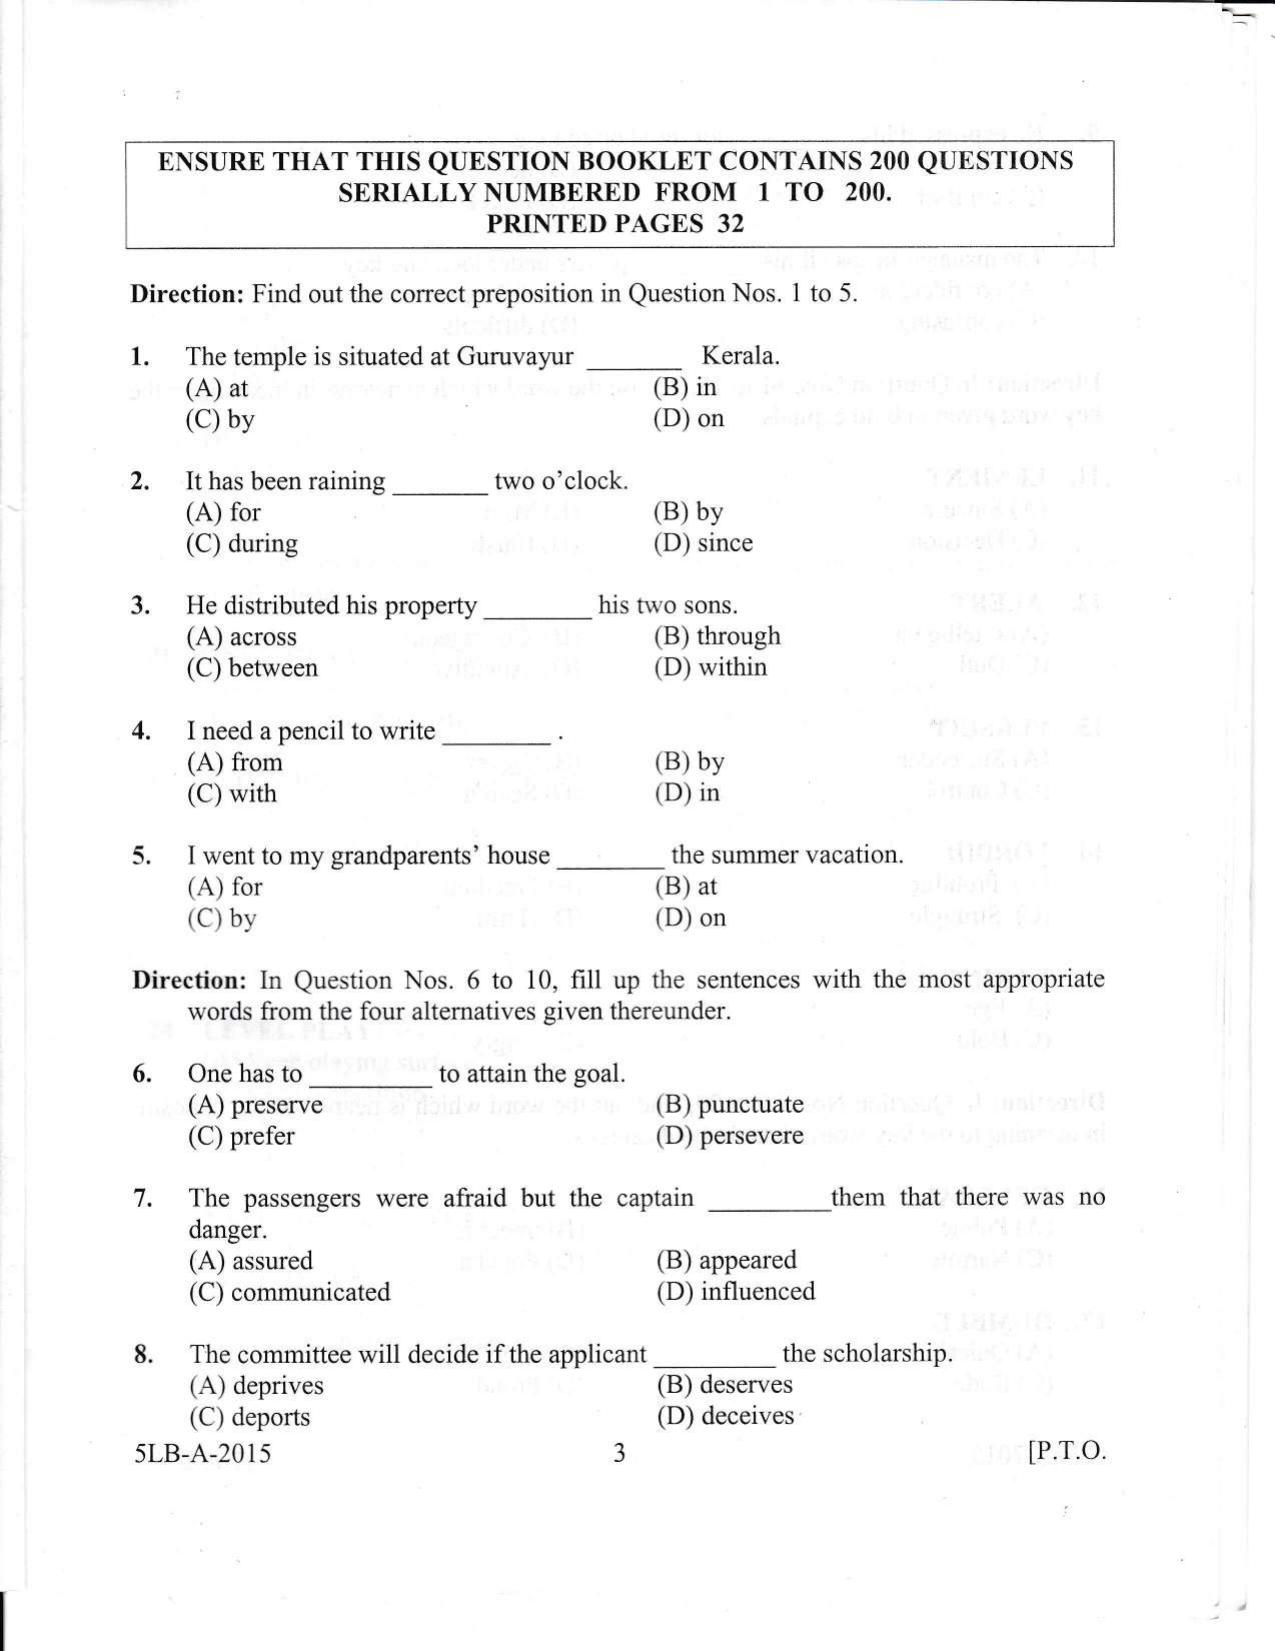 KLEE 5 Year LLB Exam 2015 Question Paper - Page 3